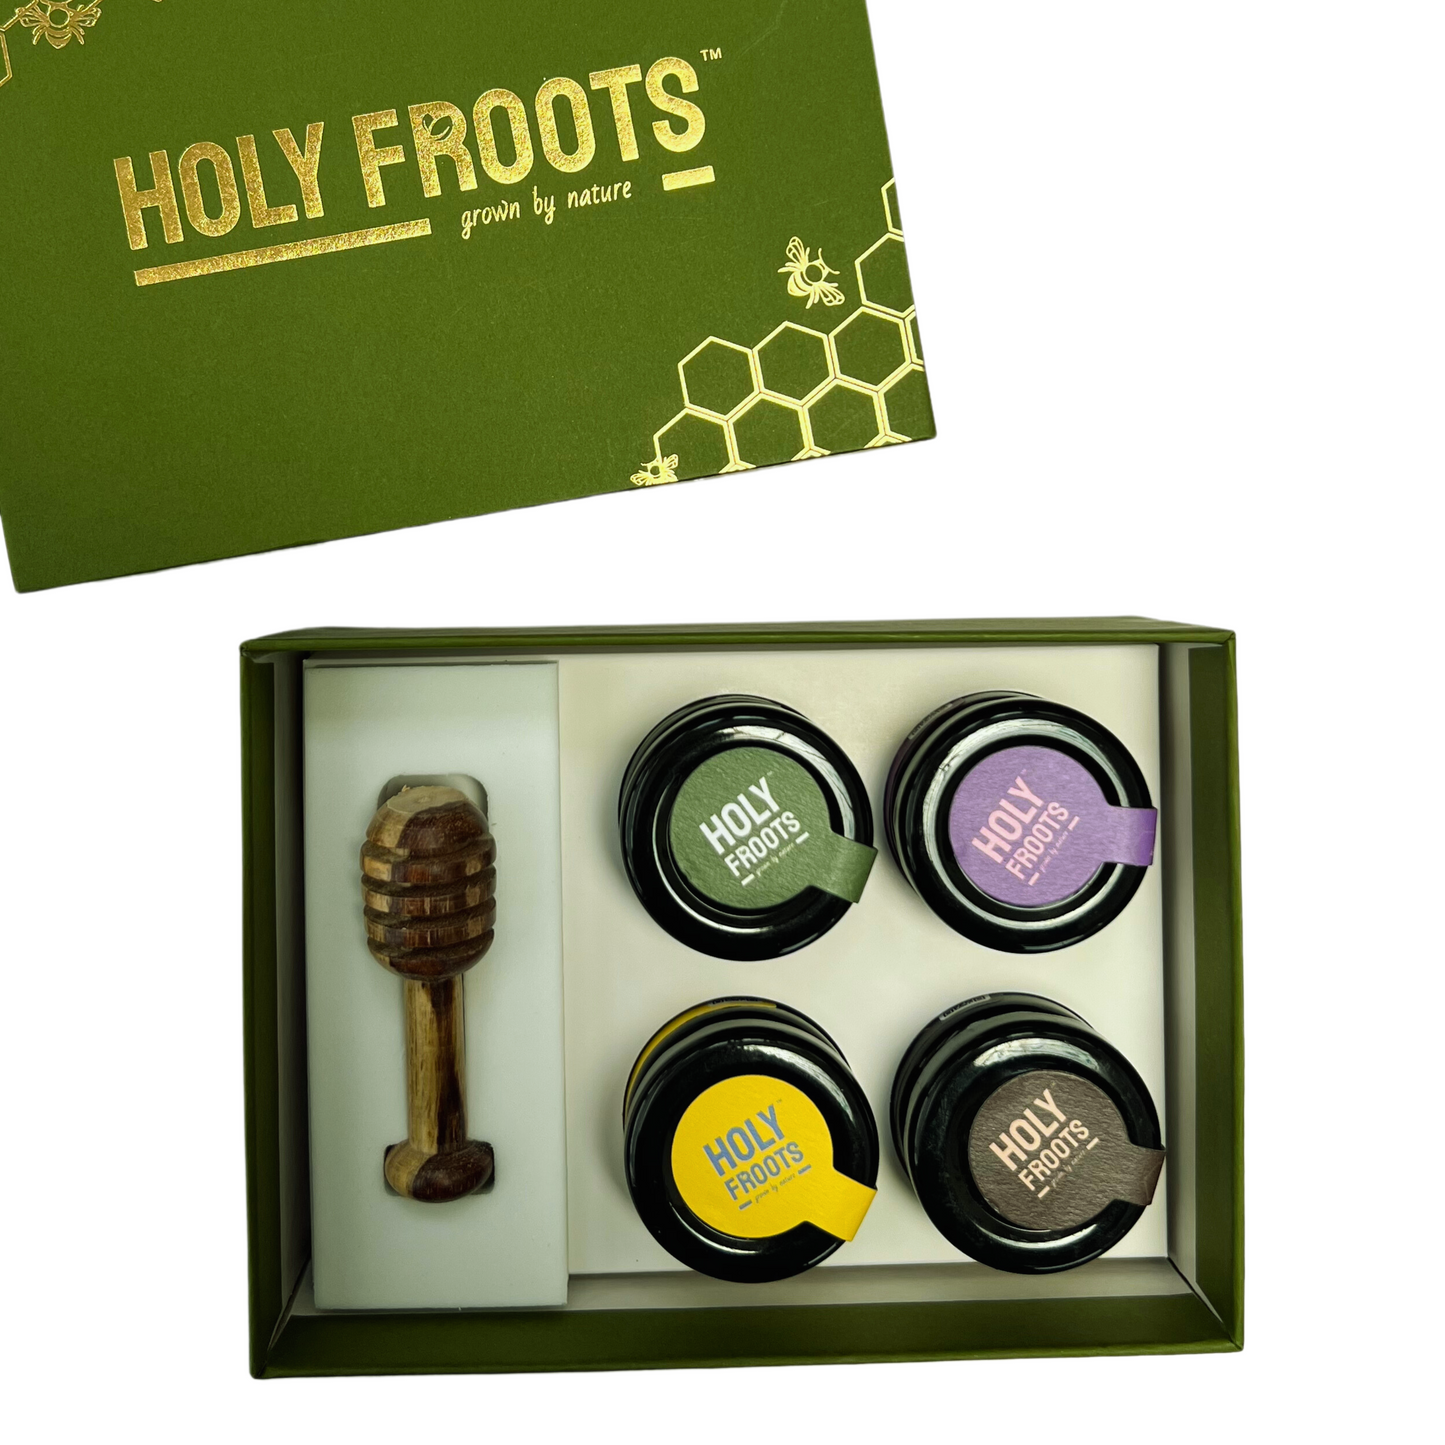 Honey Gift Box - 4 Flavours